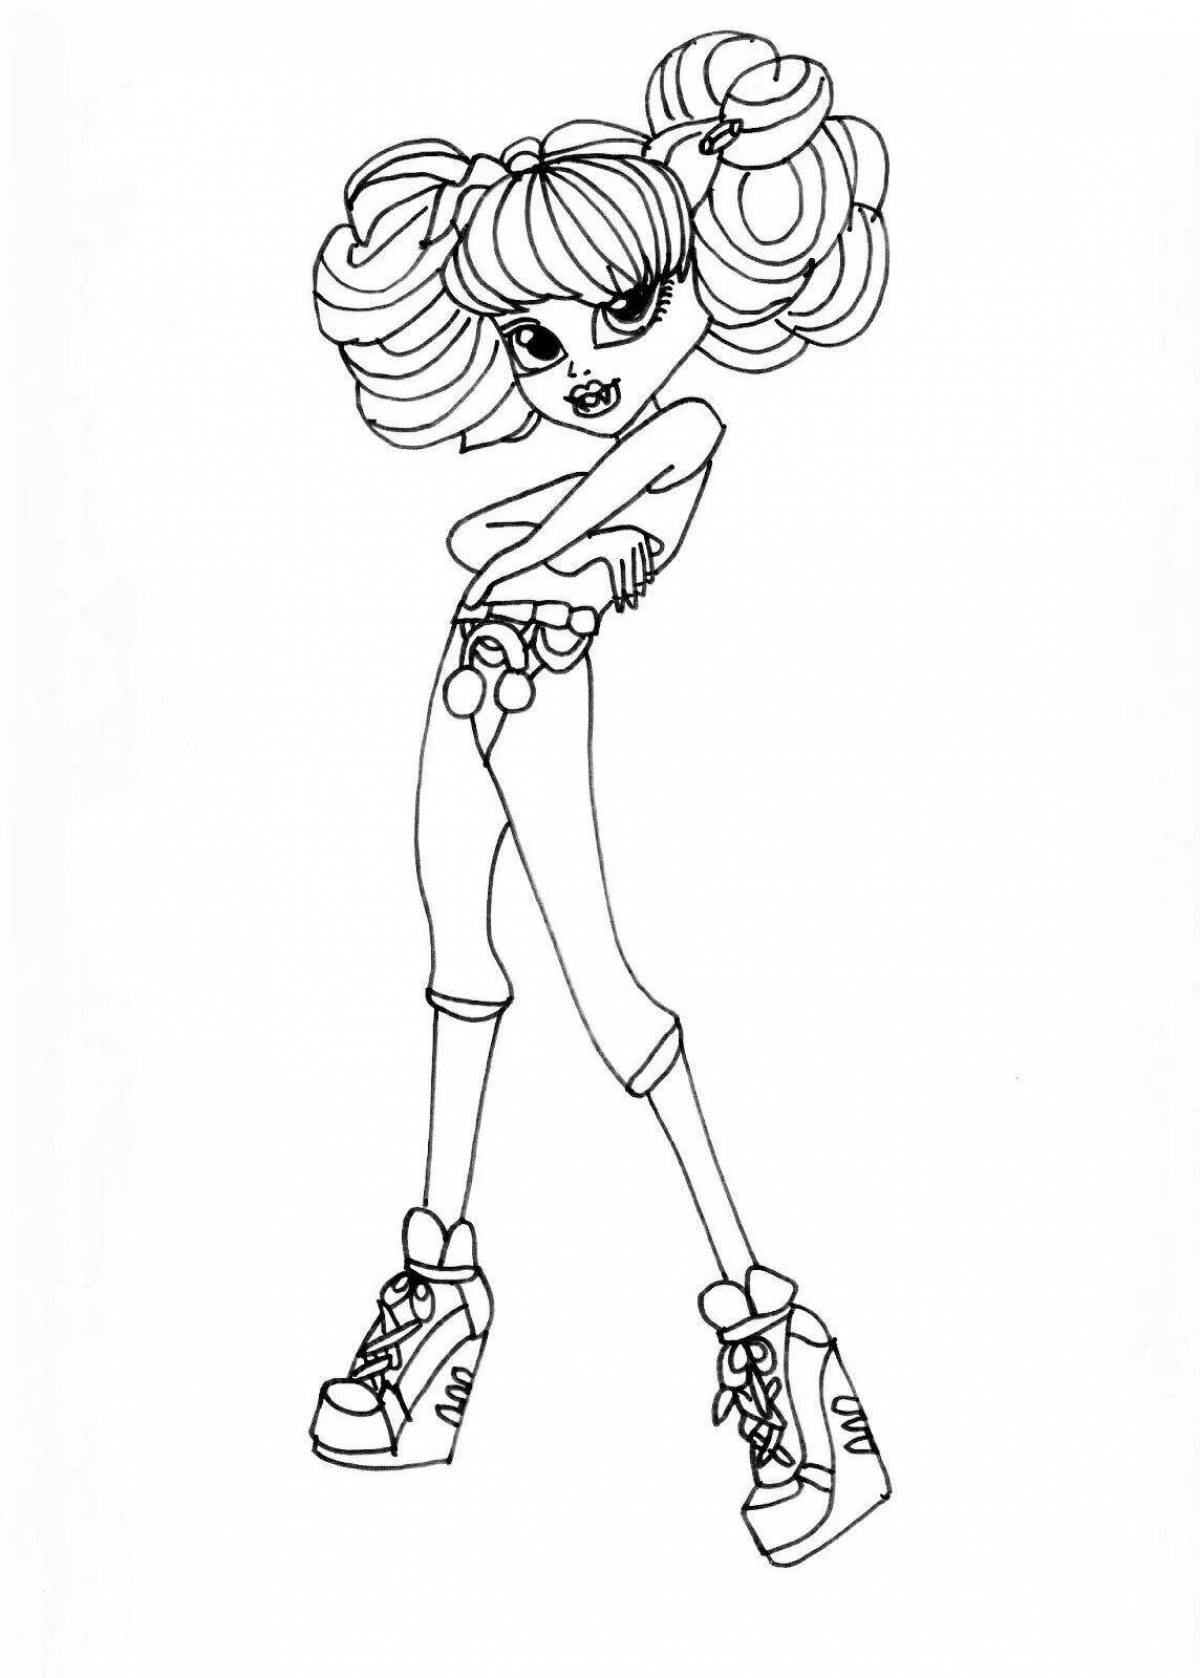 Exquisite monster high dolls coloring book